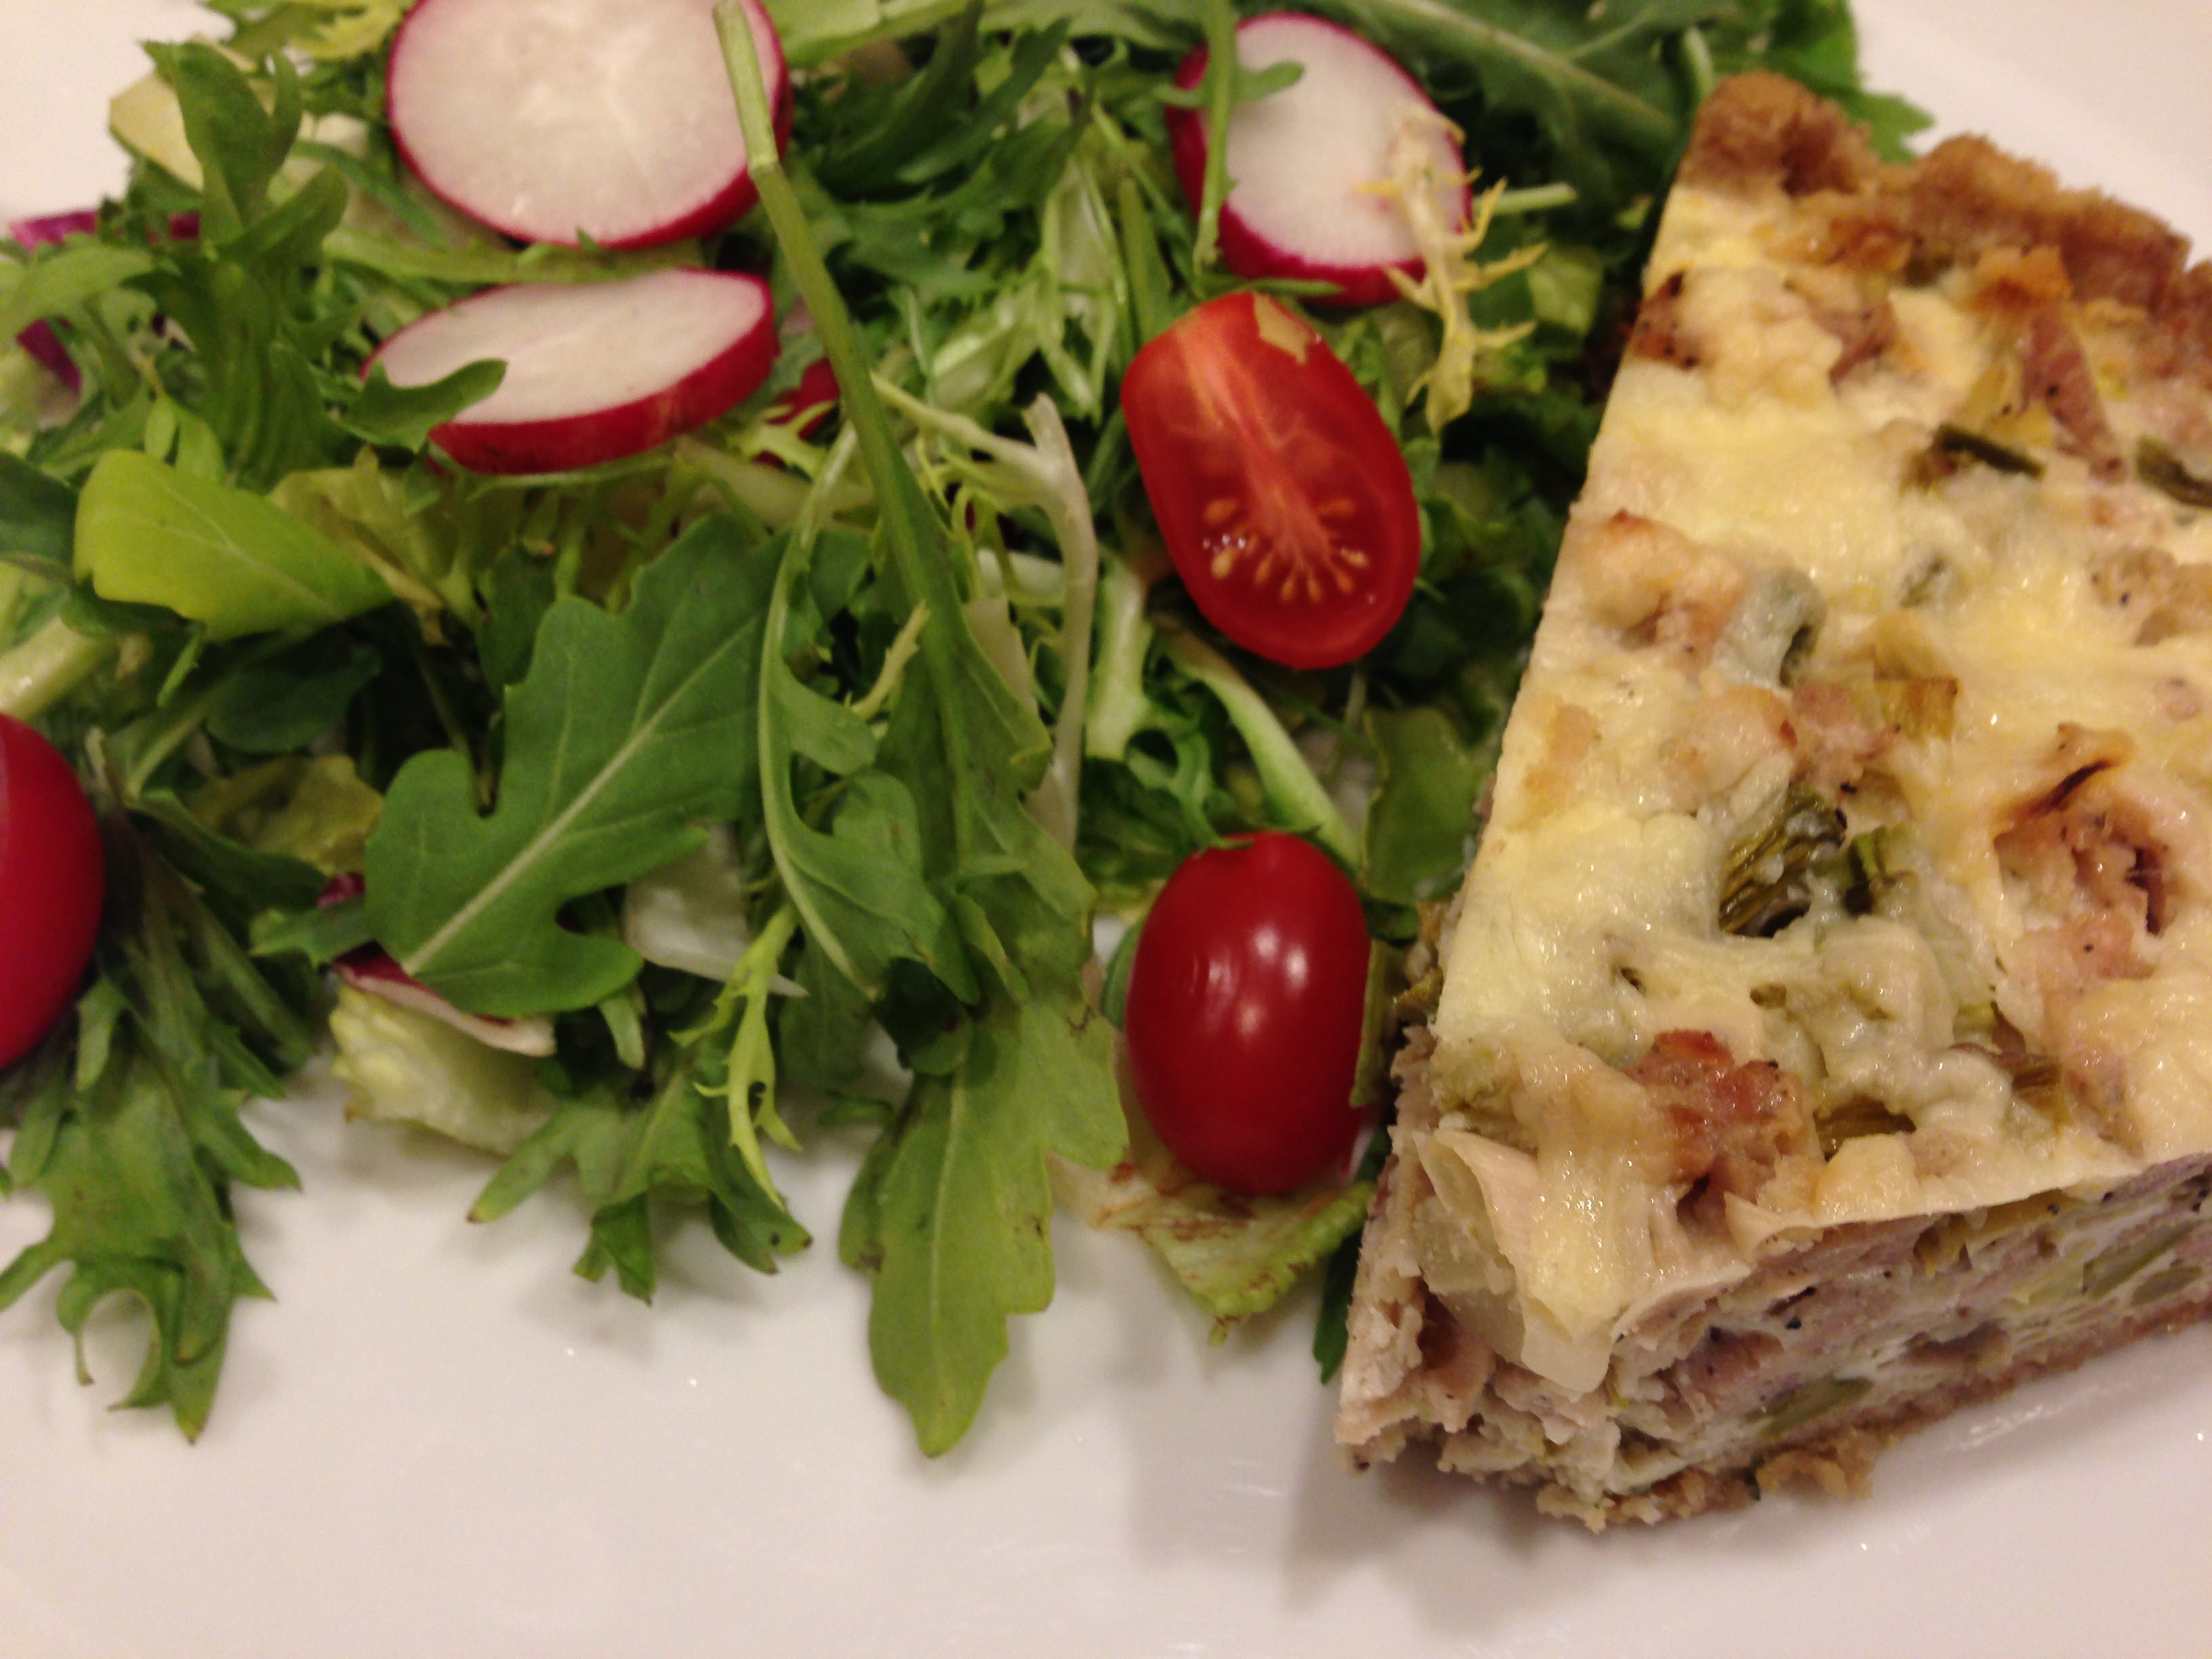 lunch ideas, quiche and salad - Living Fit Lifestyle